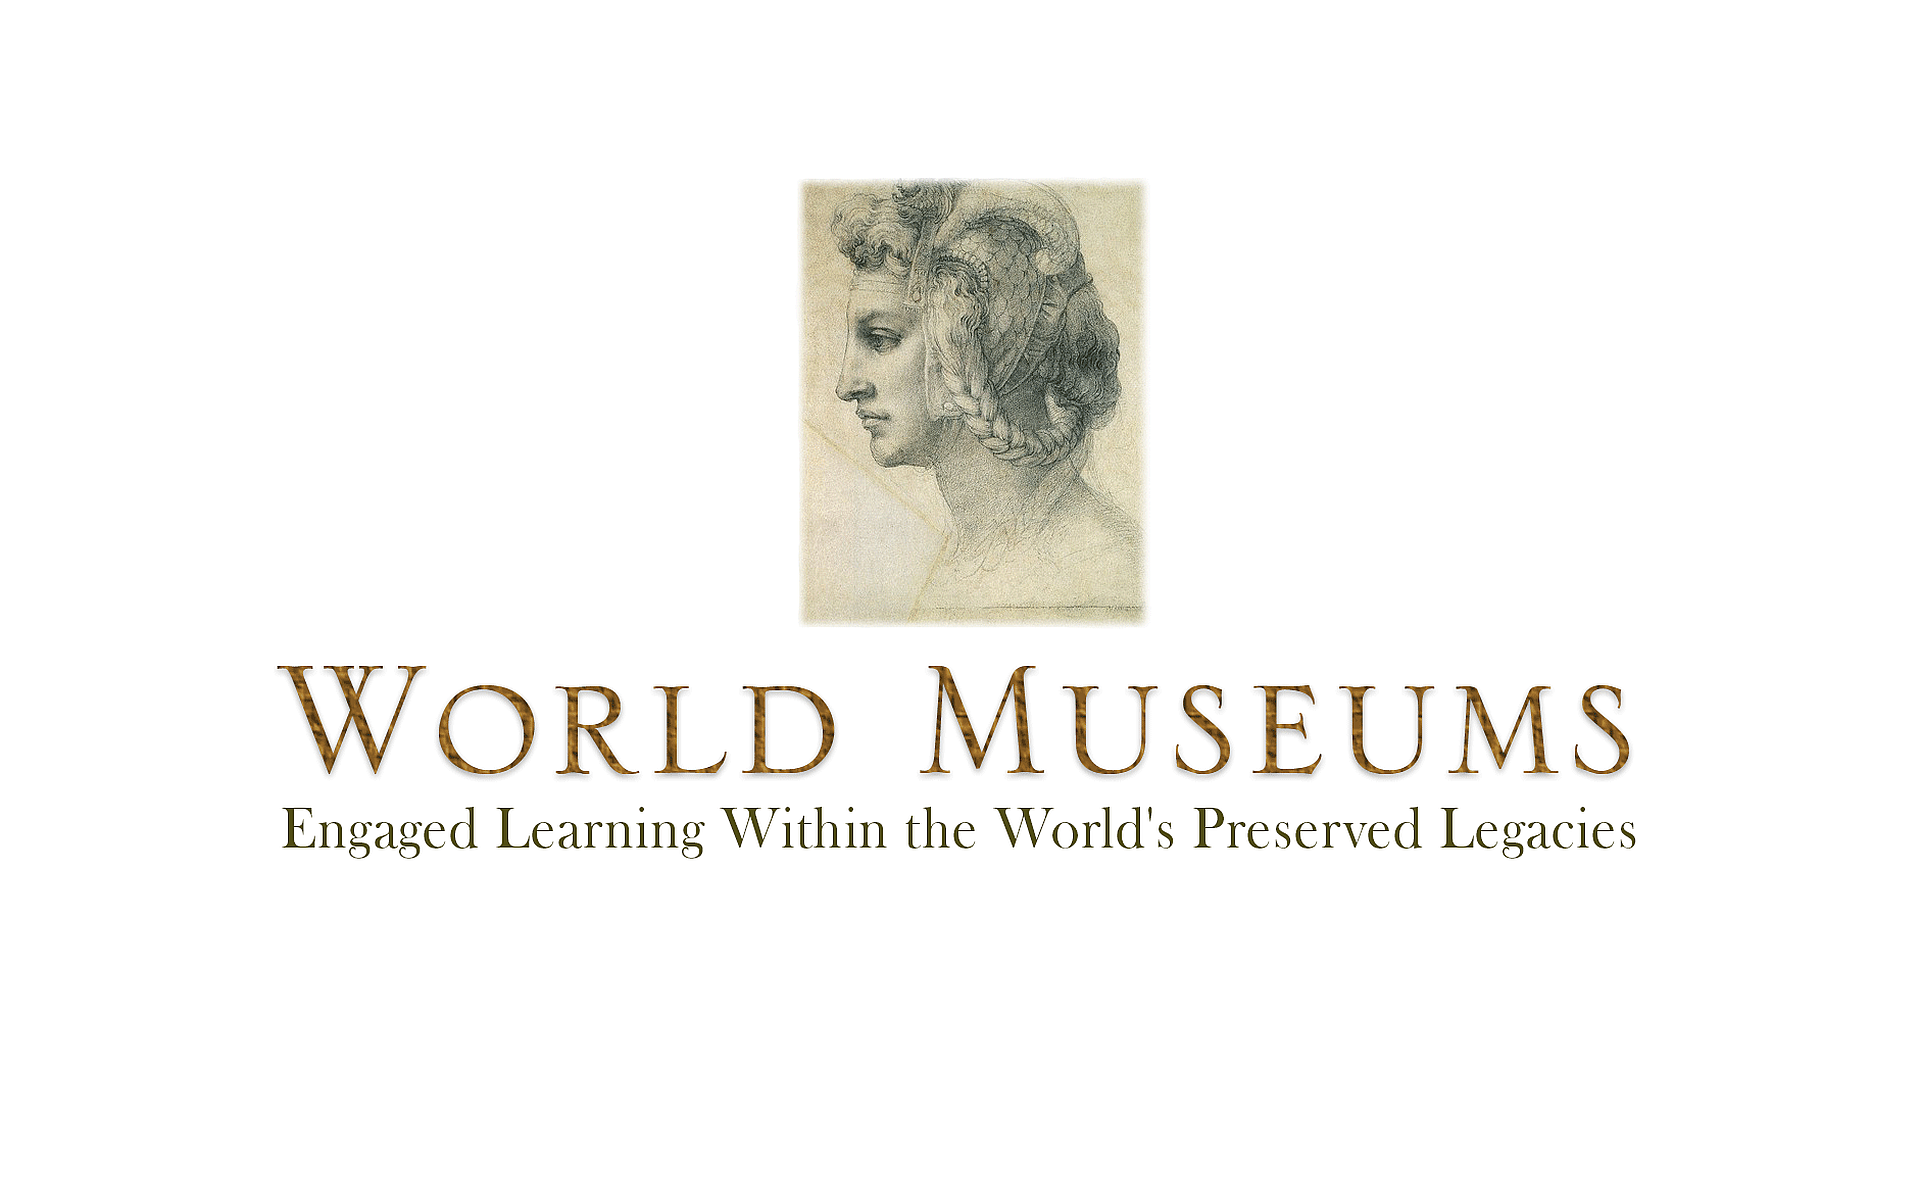 World Museums - Engaged Learning Within the World's Preserved Legacies